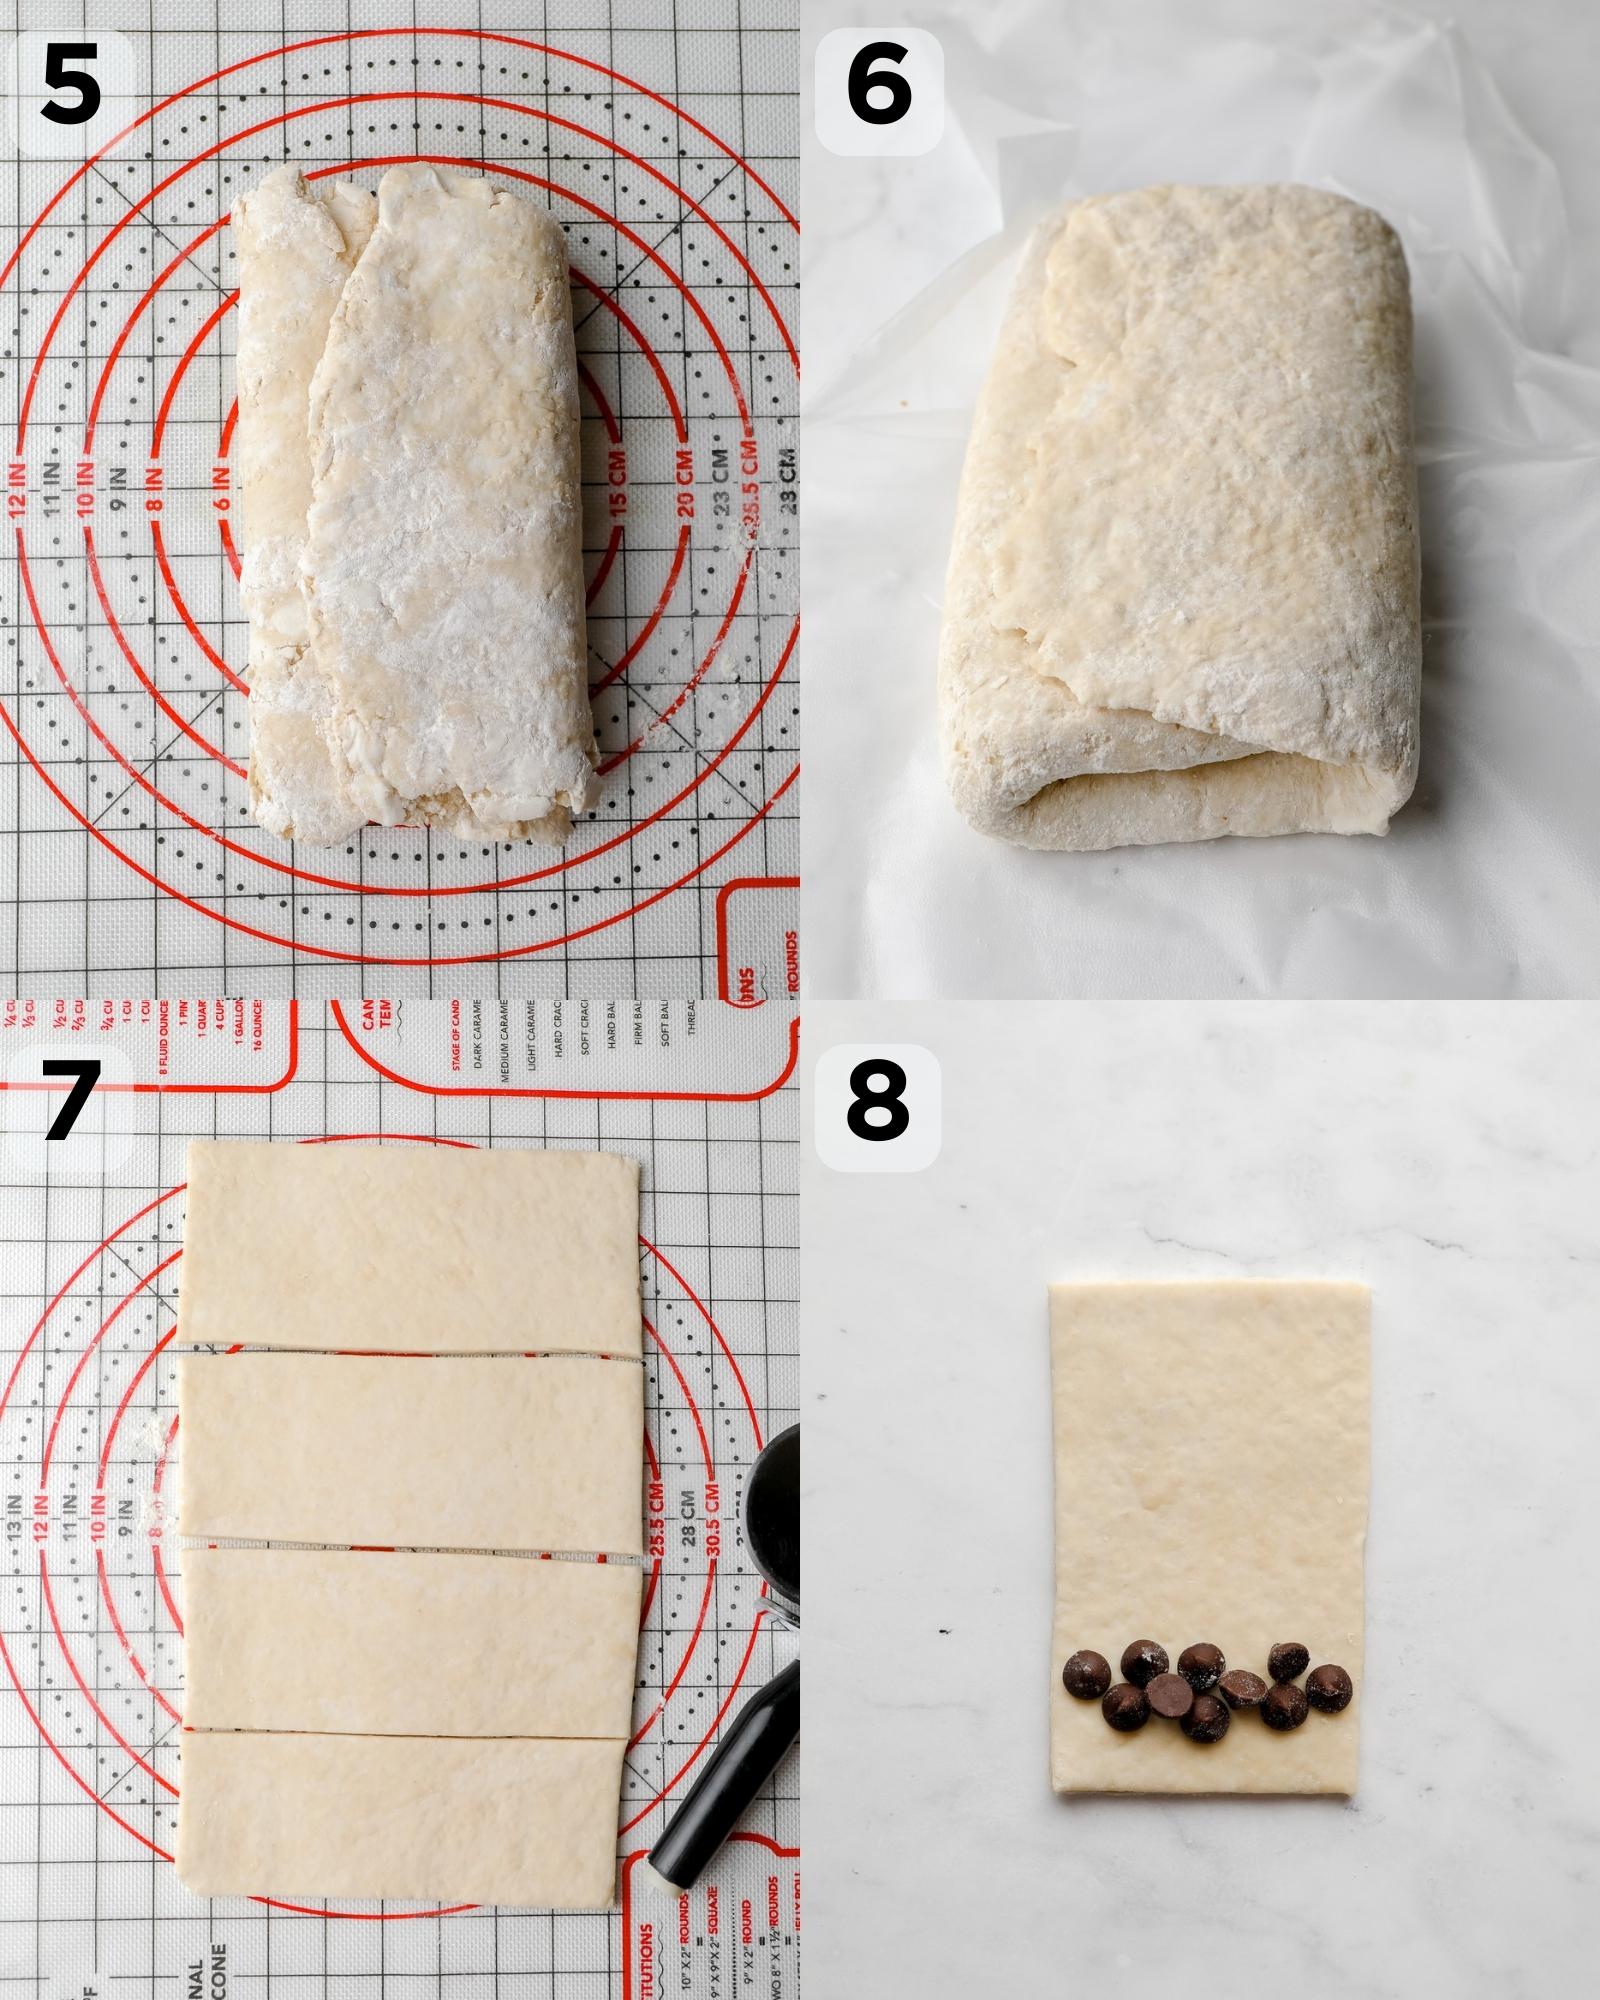 collage showing how to laminate the dough for croissants and place a line of chocolate chips on a cut piece of dough before rolling